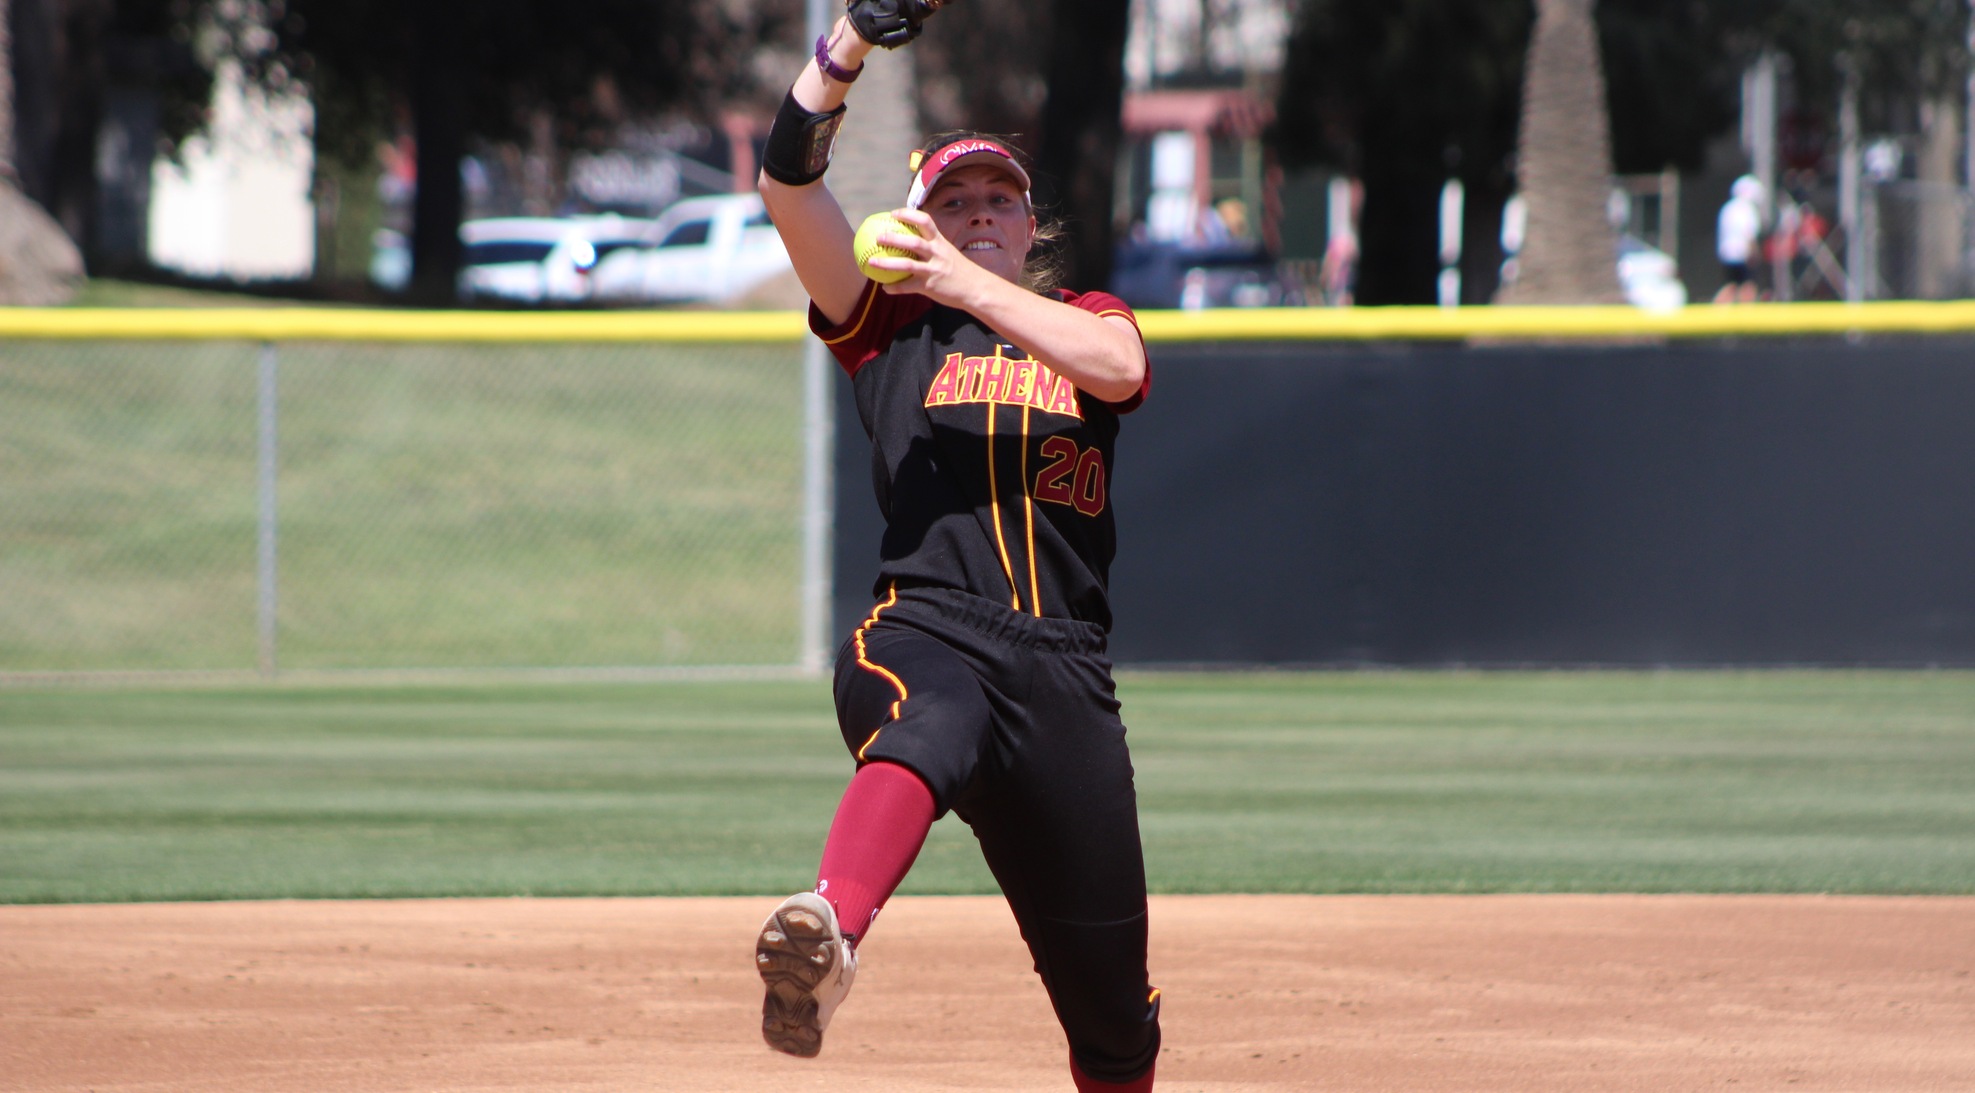 Anna Gurr (CMC) tossed a complete-game shutout in Game One. (photo credit: Alisha Alexander)